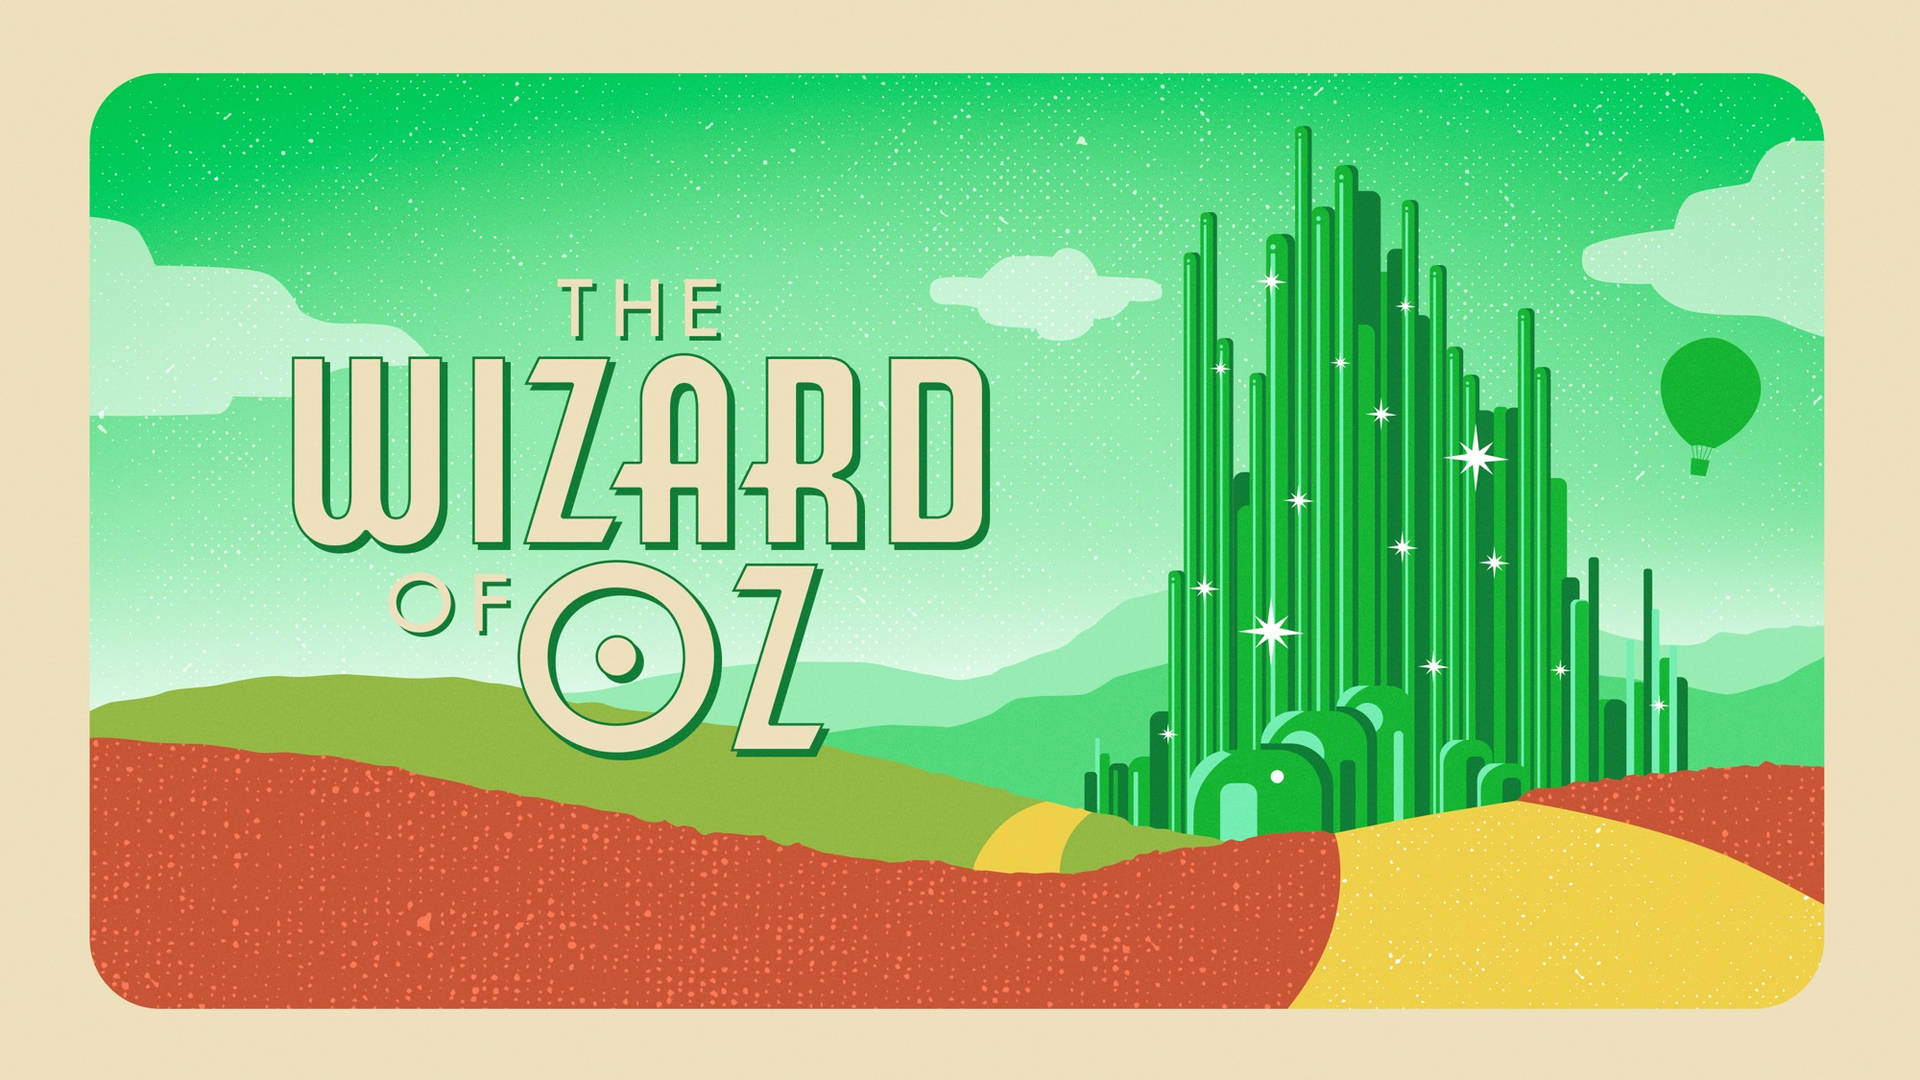 The stunning Emerald City from The Wizard of Oz Wallpaper